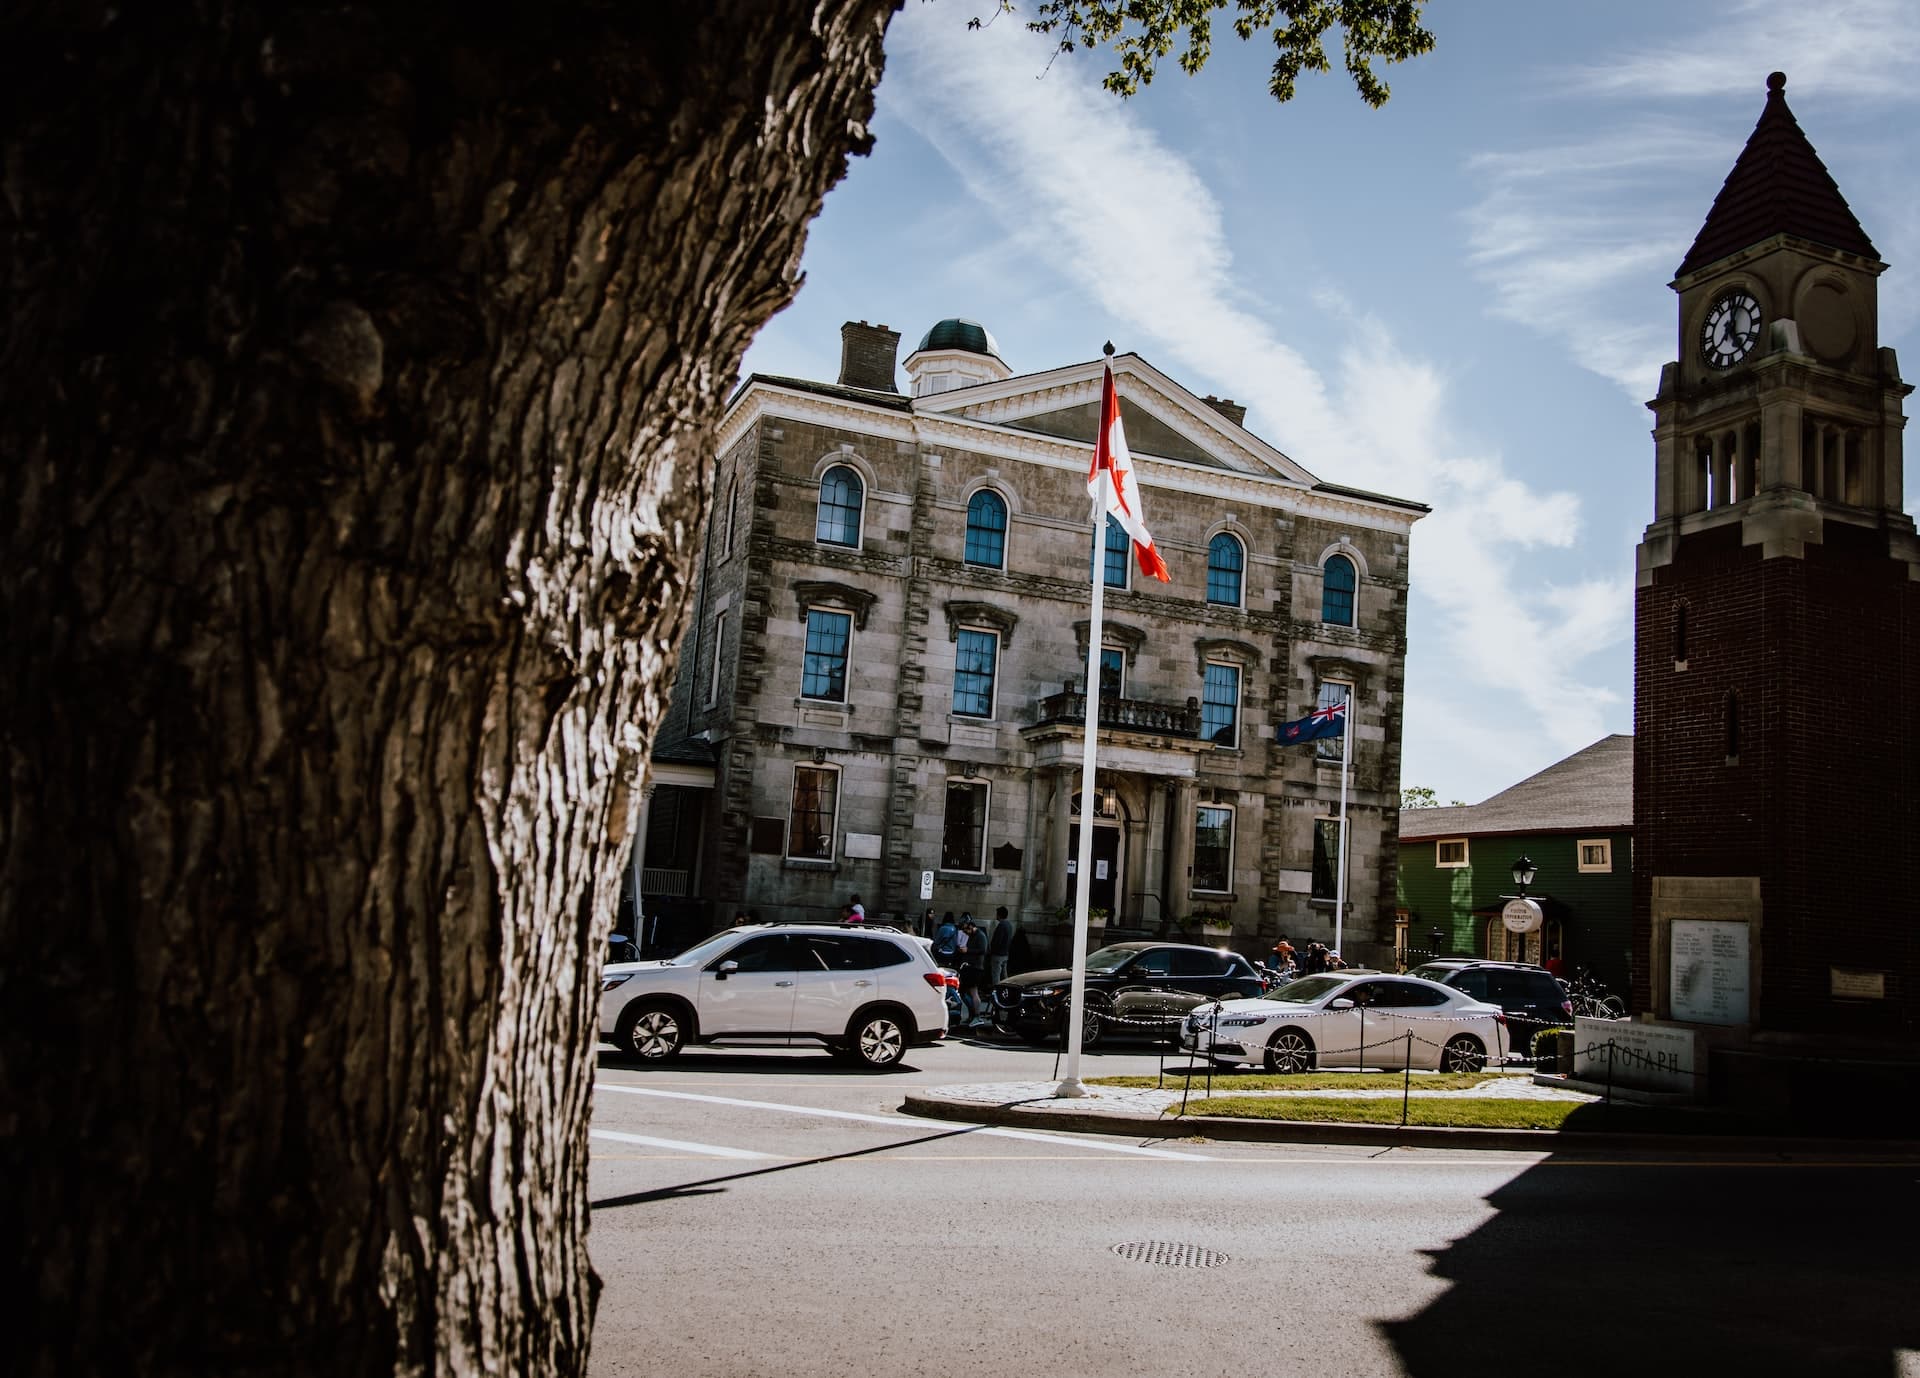 Niagara-on-the-Lake is considered one of the most beautiful towns in Ontario